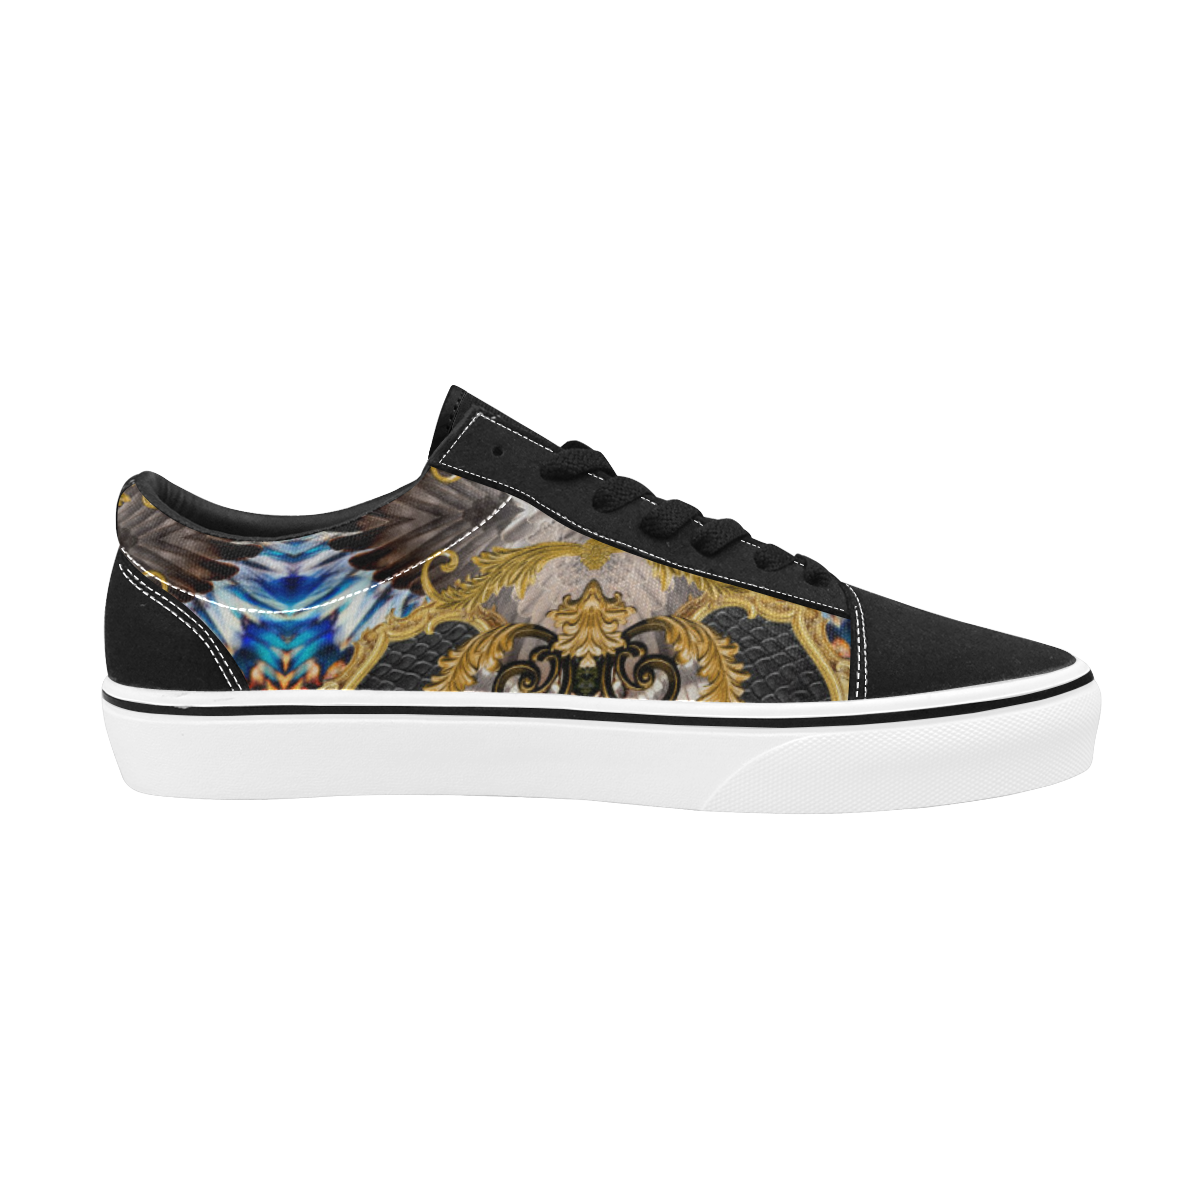 Luxury Abstract Design Women's Low Top Skateboarding Shoes/Large (Model E001-2)